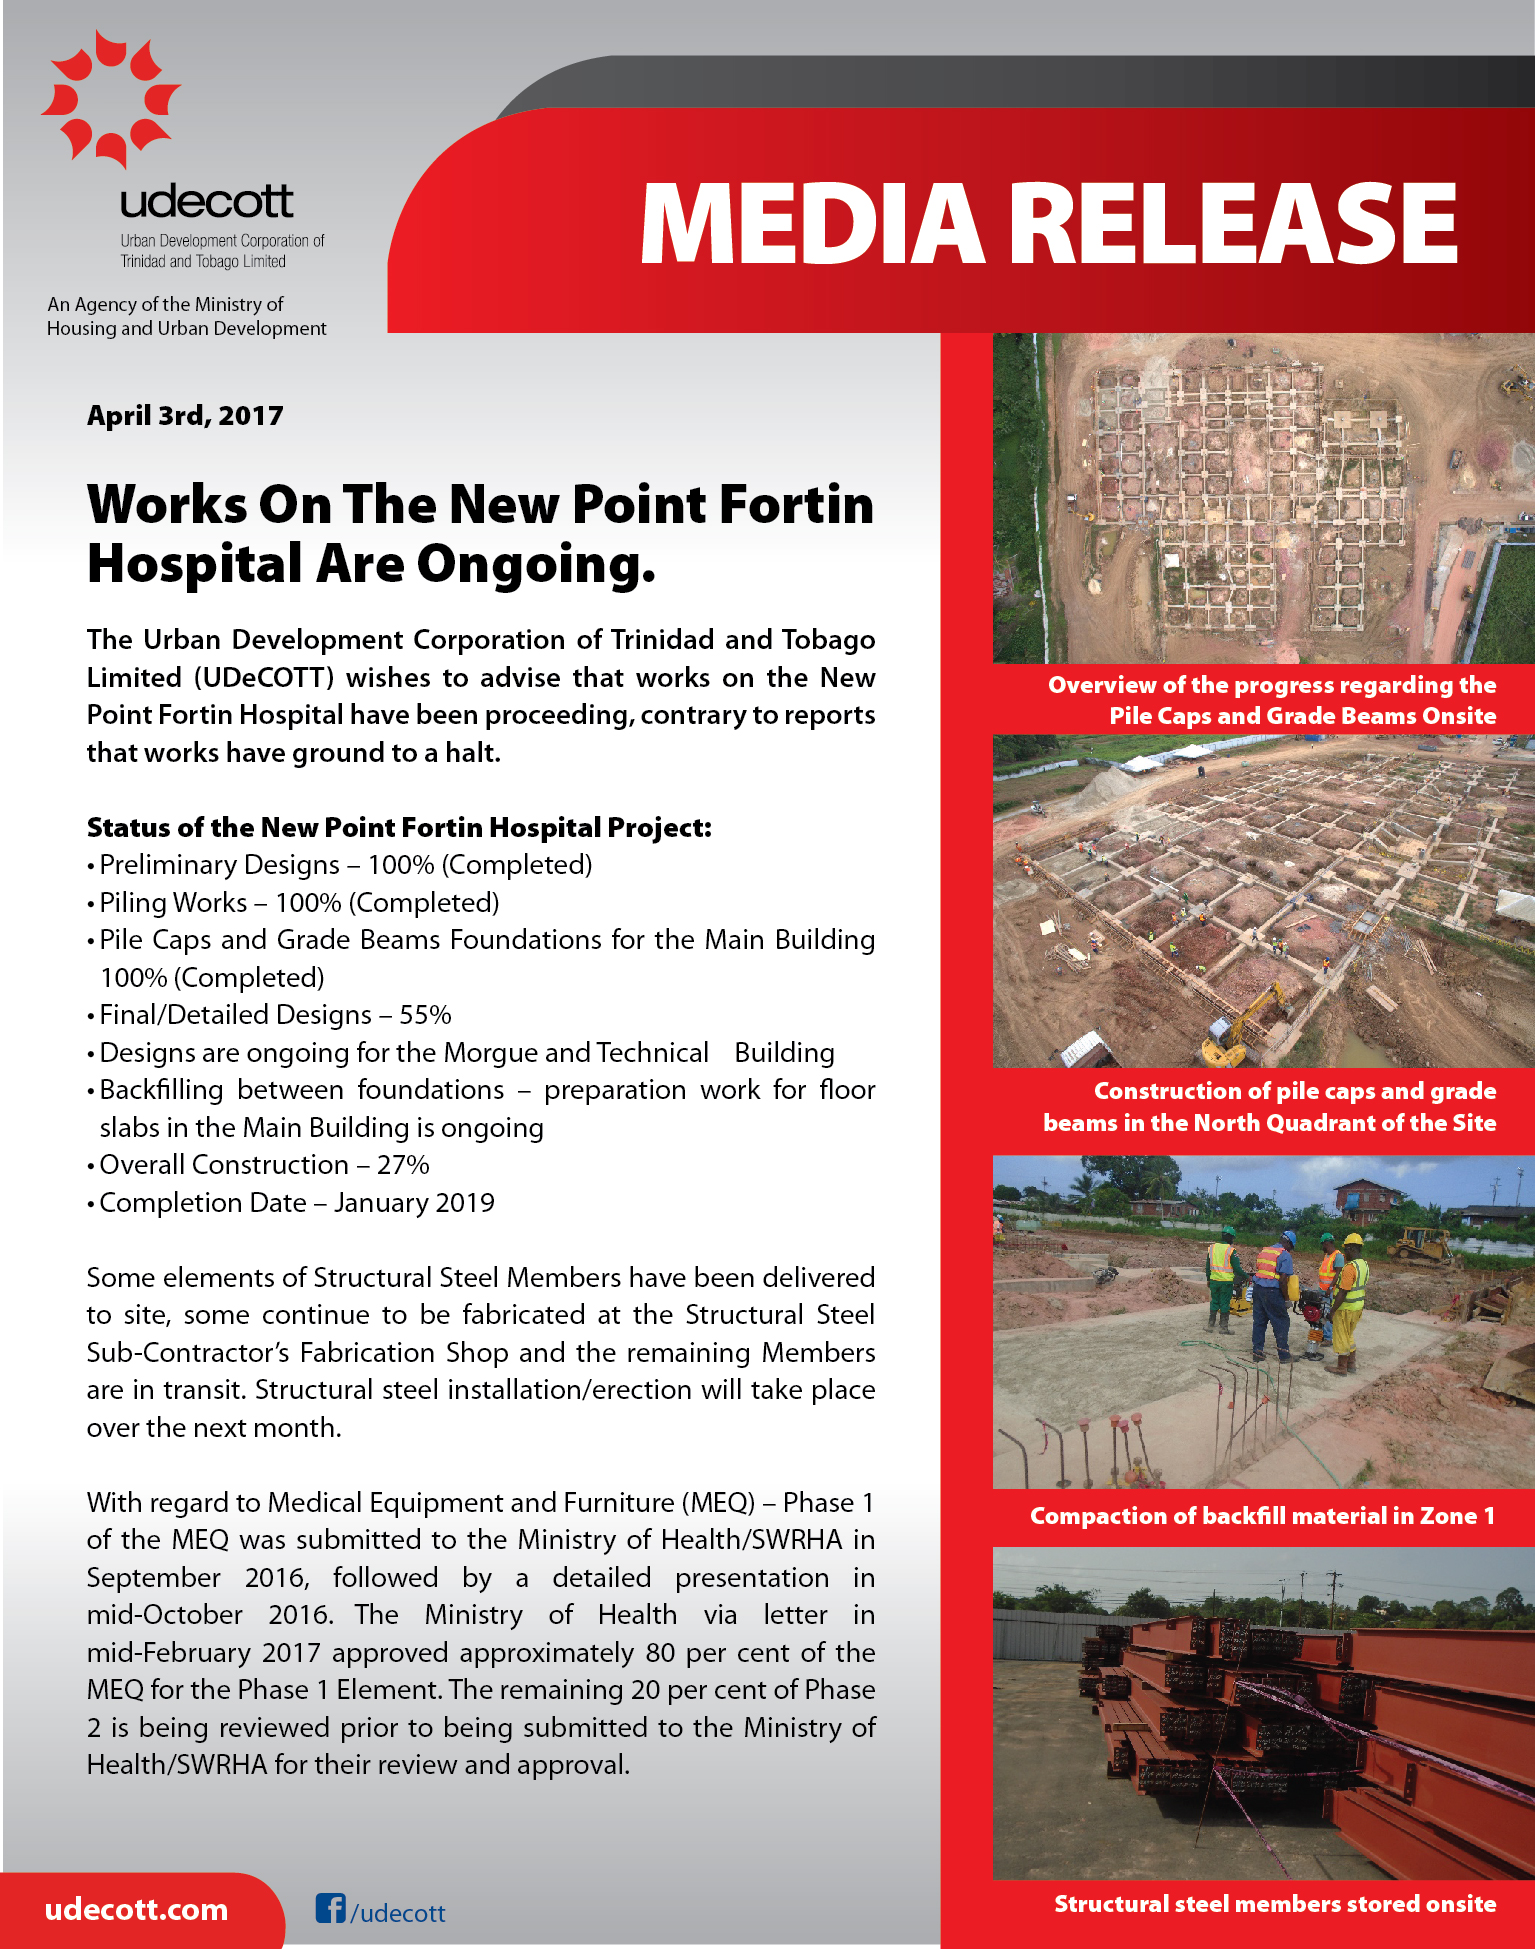 Media Release - Works On The New Point Fortin Hospital Are Ongoing